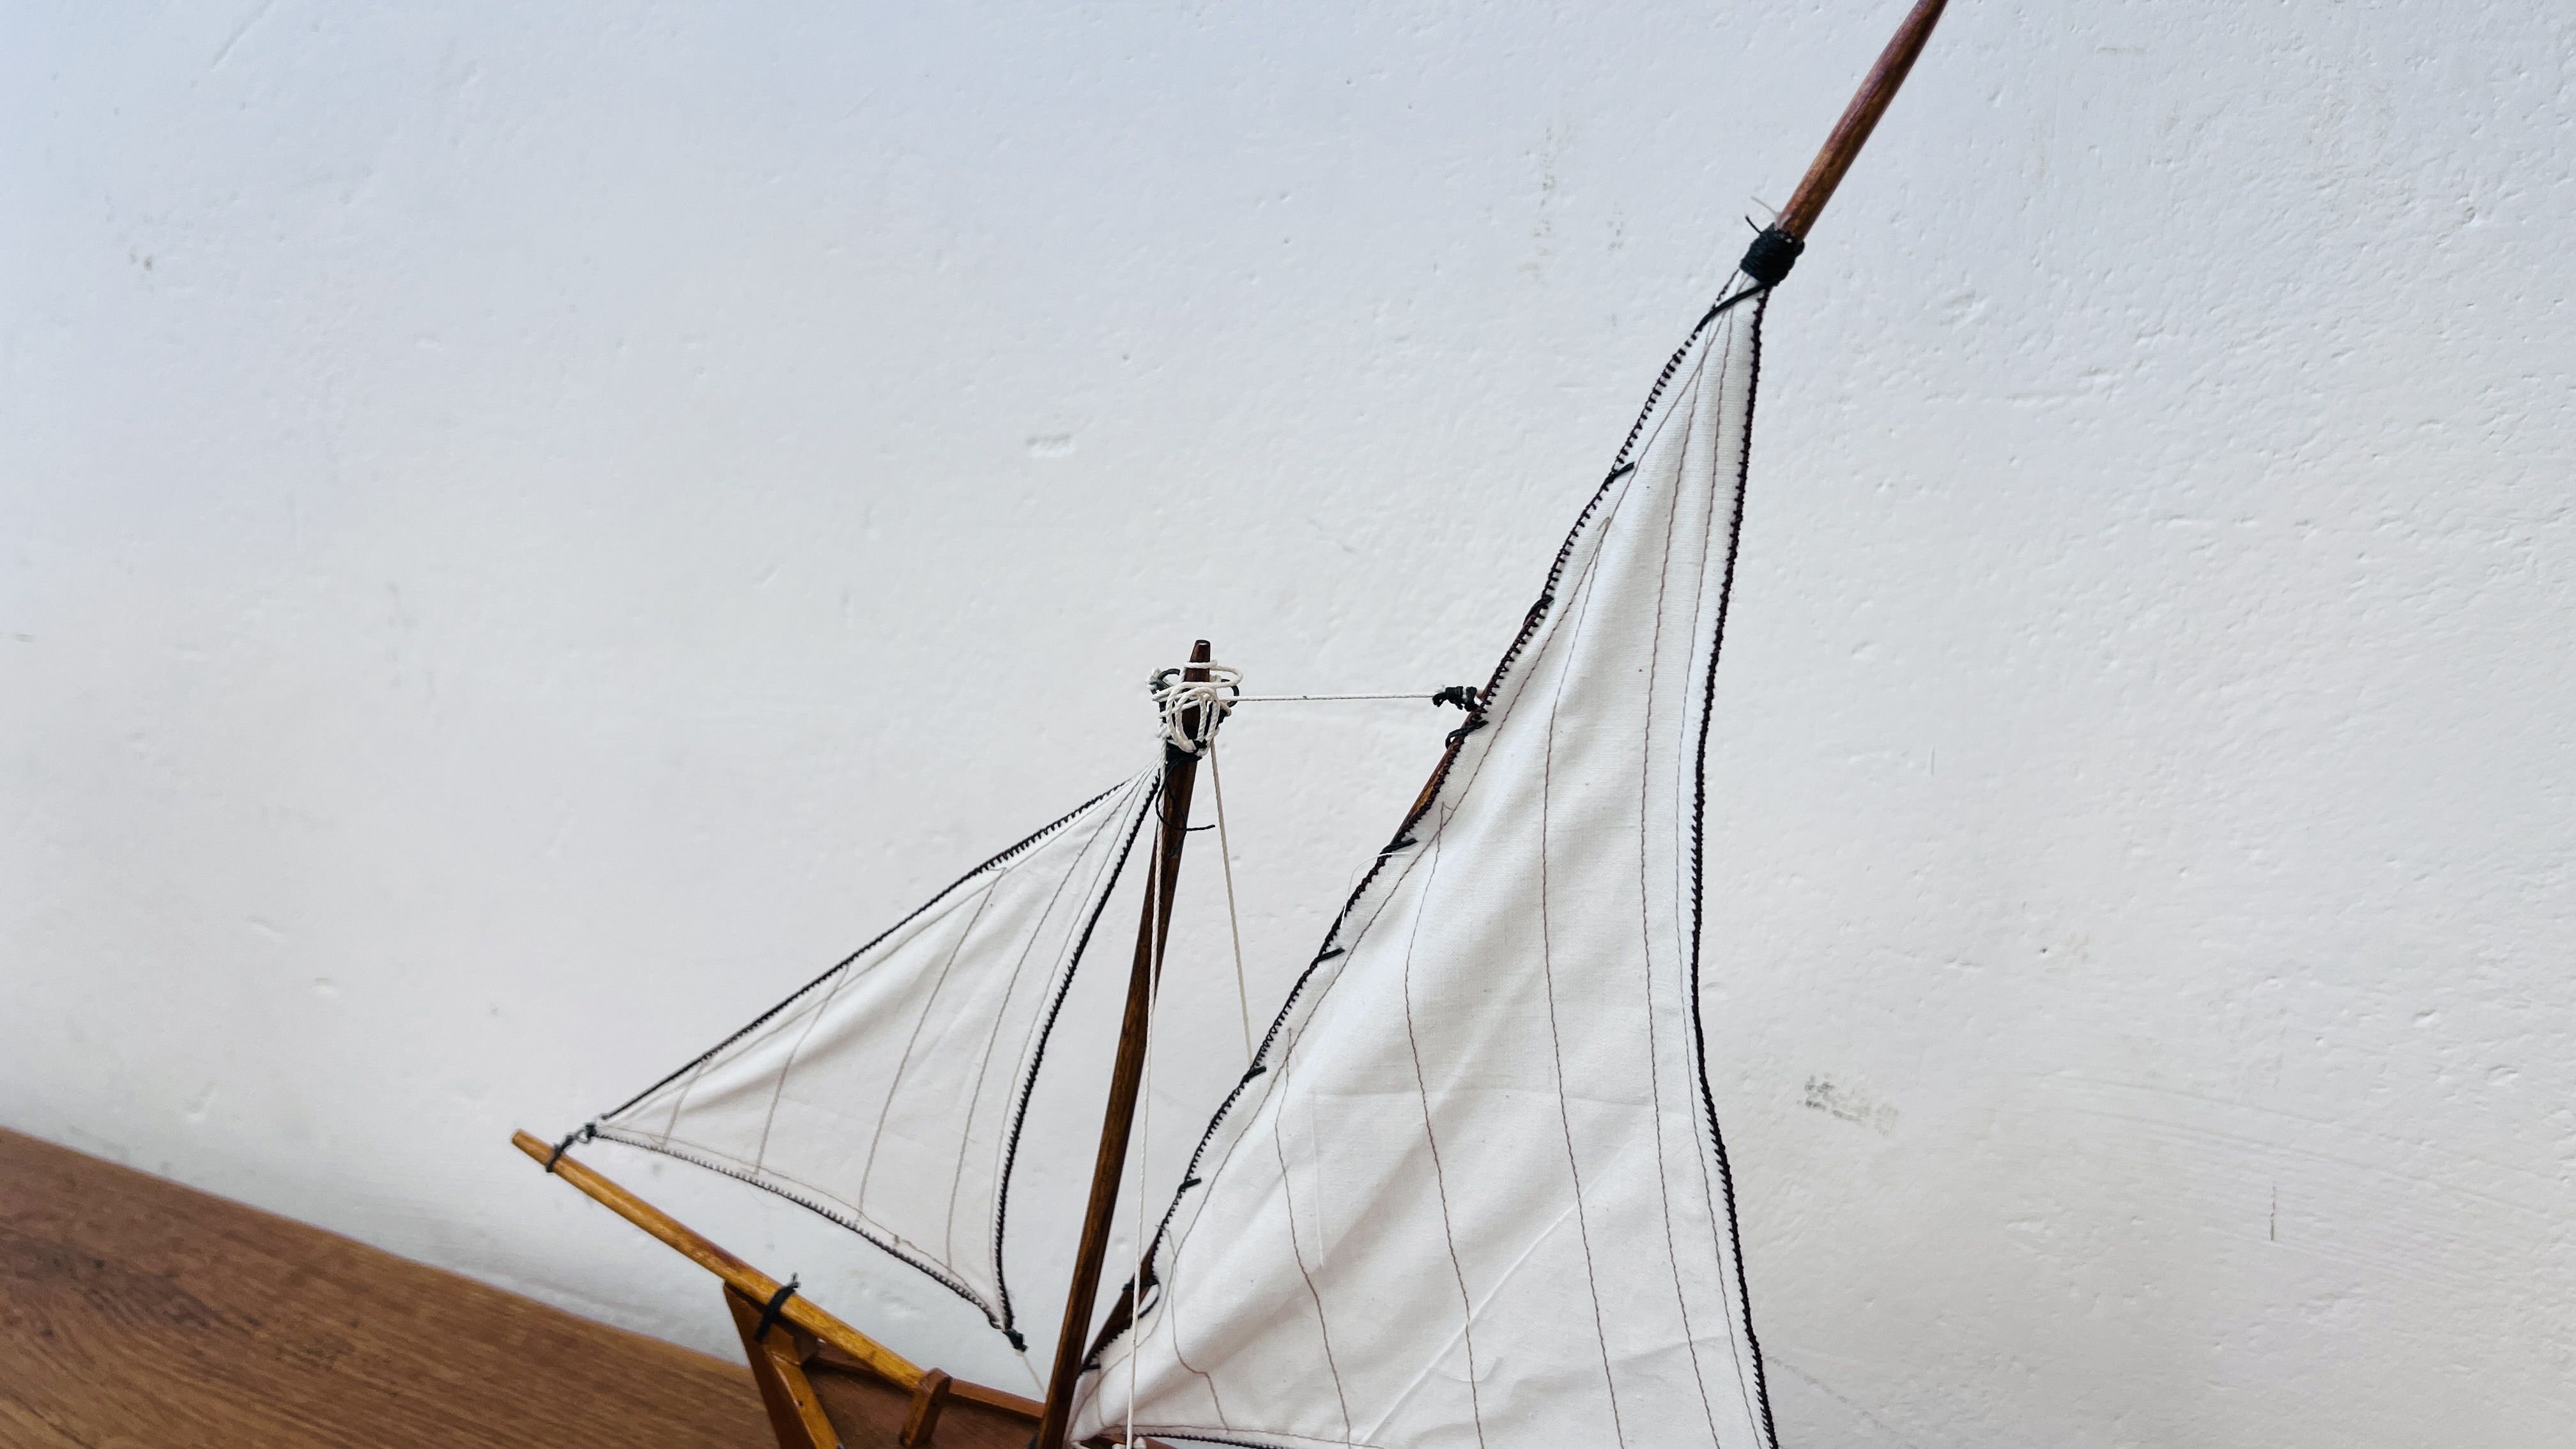 A MODEL WOODEN GALLEON LENGTH 80CM, HEIGHT 60CM AND A WOODEN SAILING BOAT MODEL LENGTH 43CM, - Image 10 of 10